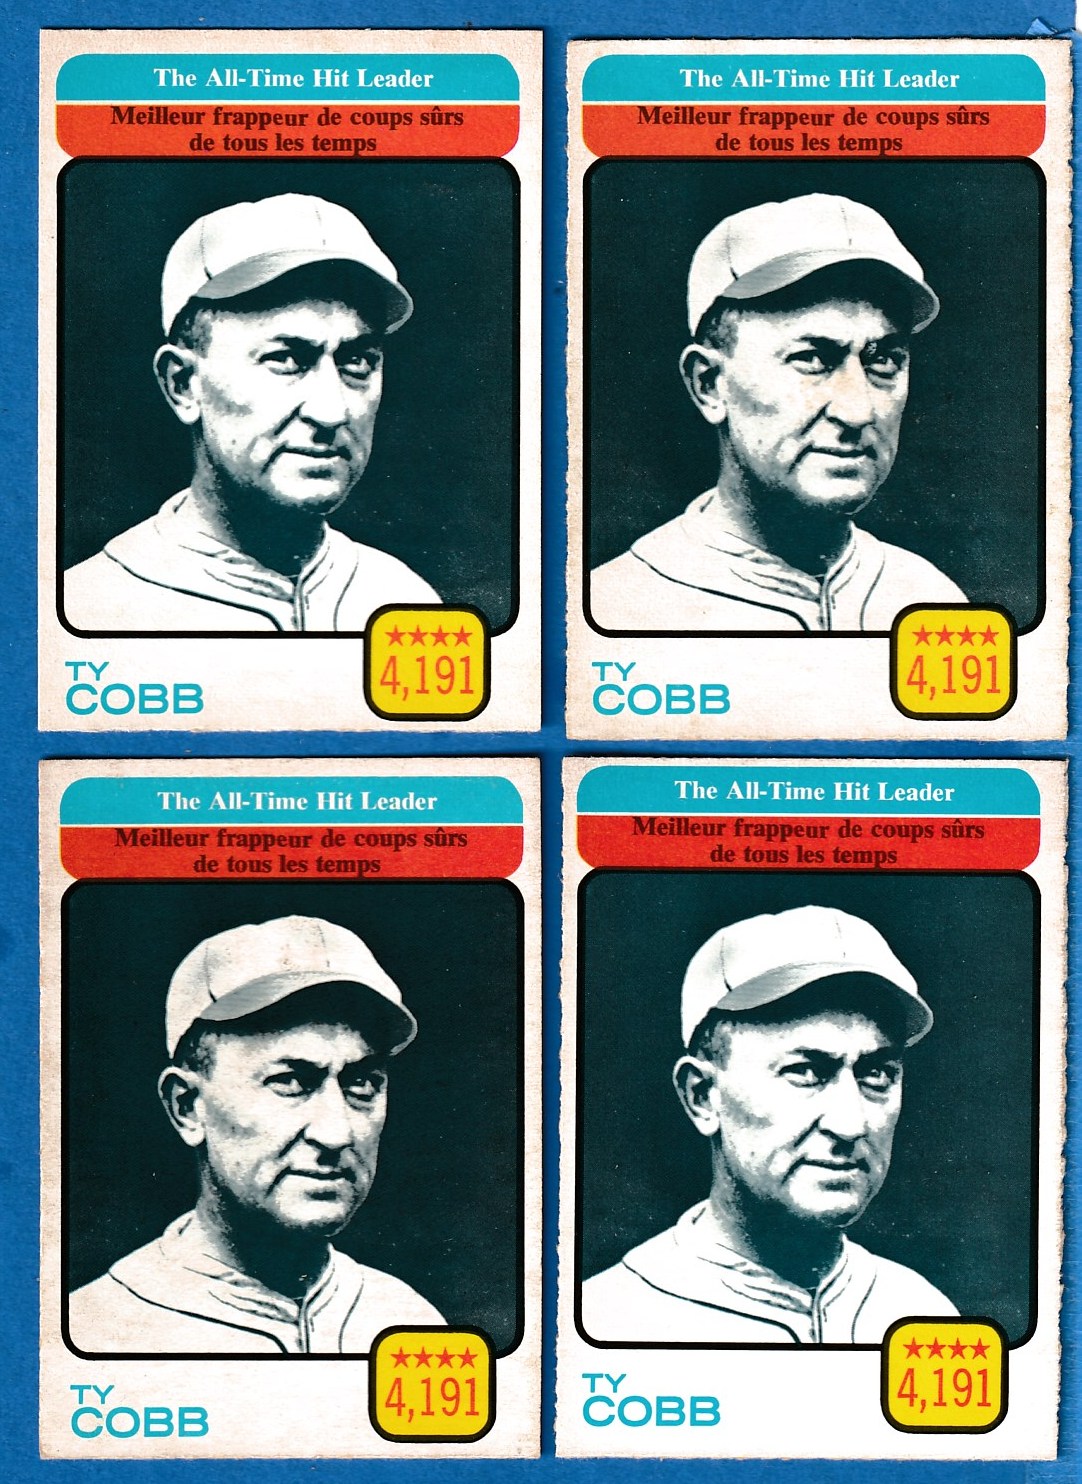 1973 O-Pee-Chee/OPC #471 Ty Cobb All-Time Leaders (4,191 Hits) (Tigers) Baseball cards value